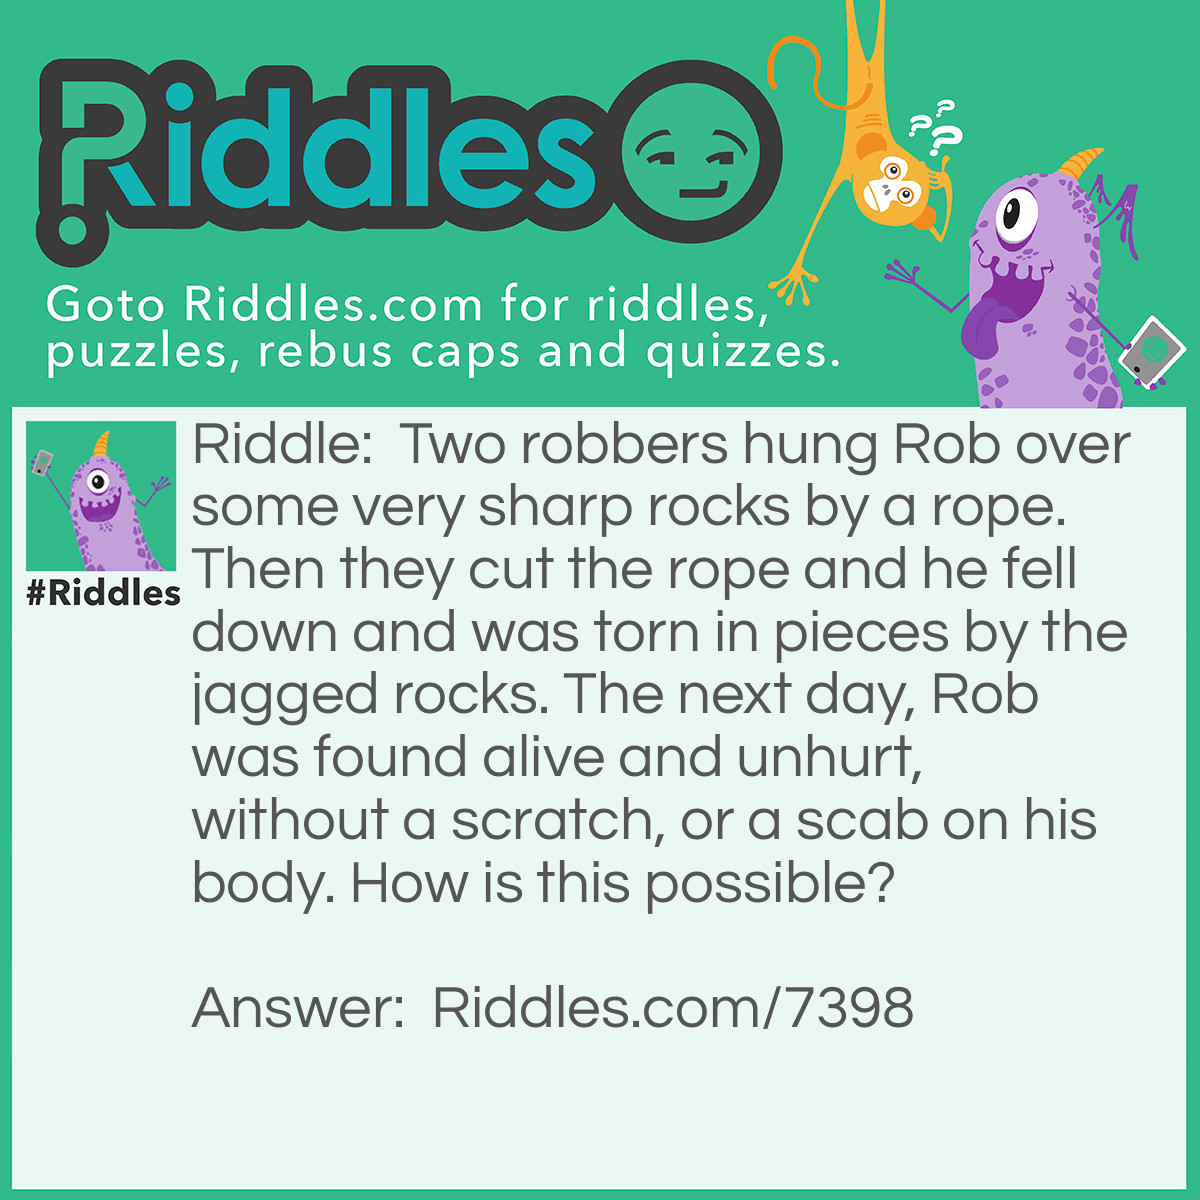 Riddle: Two robbers hung Rob over some very sharp rocks by a rope. Then they cut the rope and he fell down and was torn in pieces by the jagged rocks. The next day, Rob was found alive and unhurt, without a scratch, or a scab on his body. How is this possible? Answer: The Robbers didn't hang Rob himself, they just hung a piece of paper that said Rob From the rope.